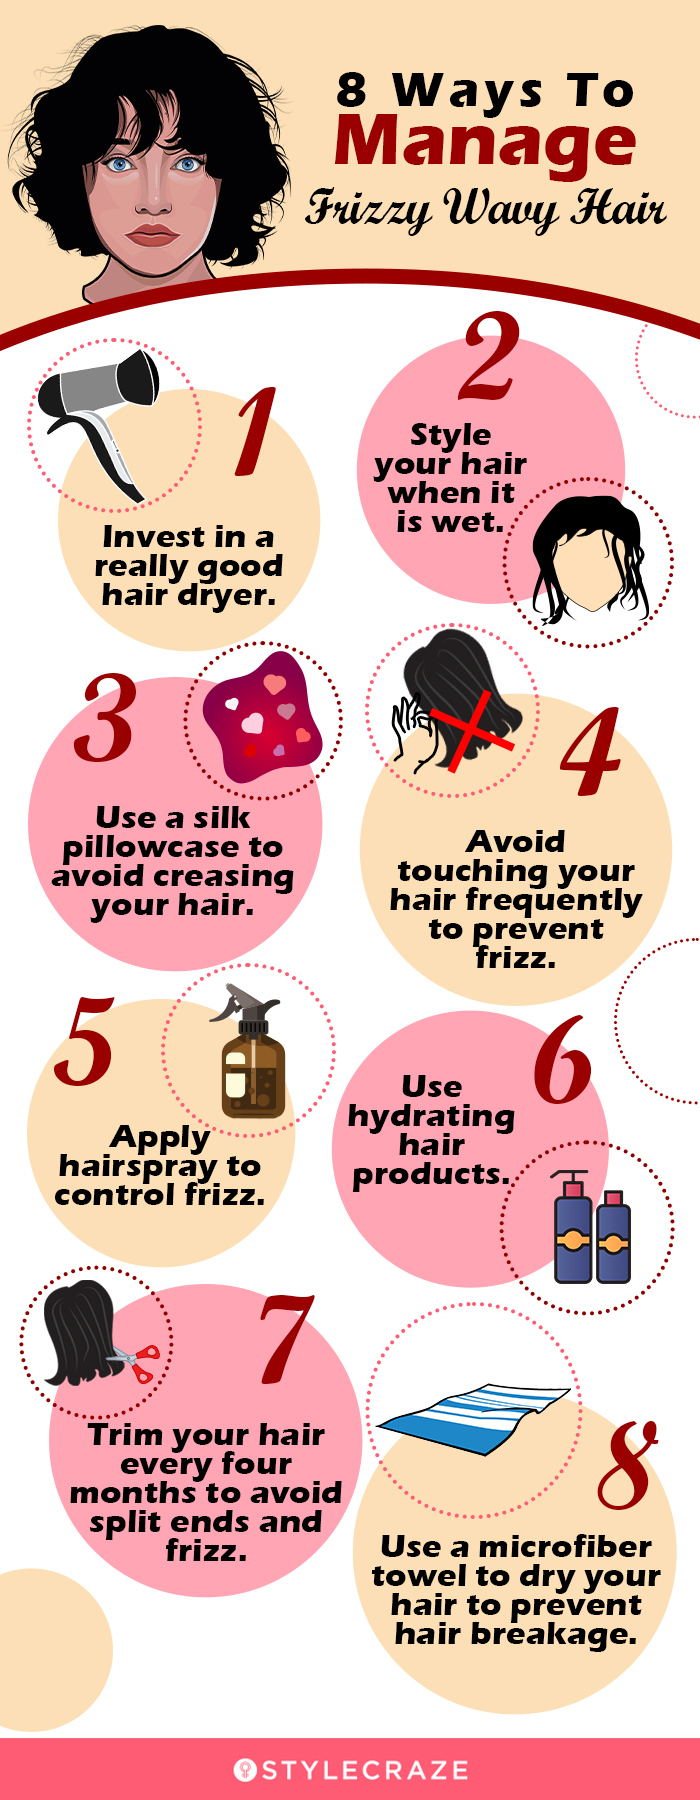 8 ways to manage frizzy wavy hair (infographic)